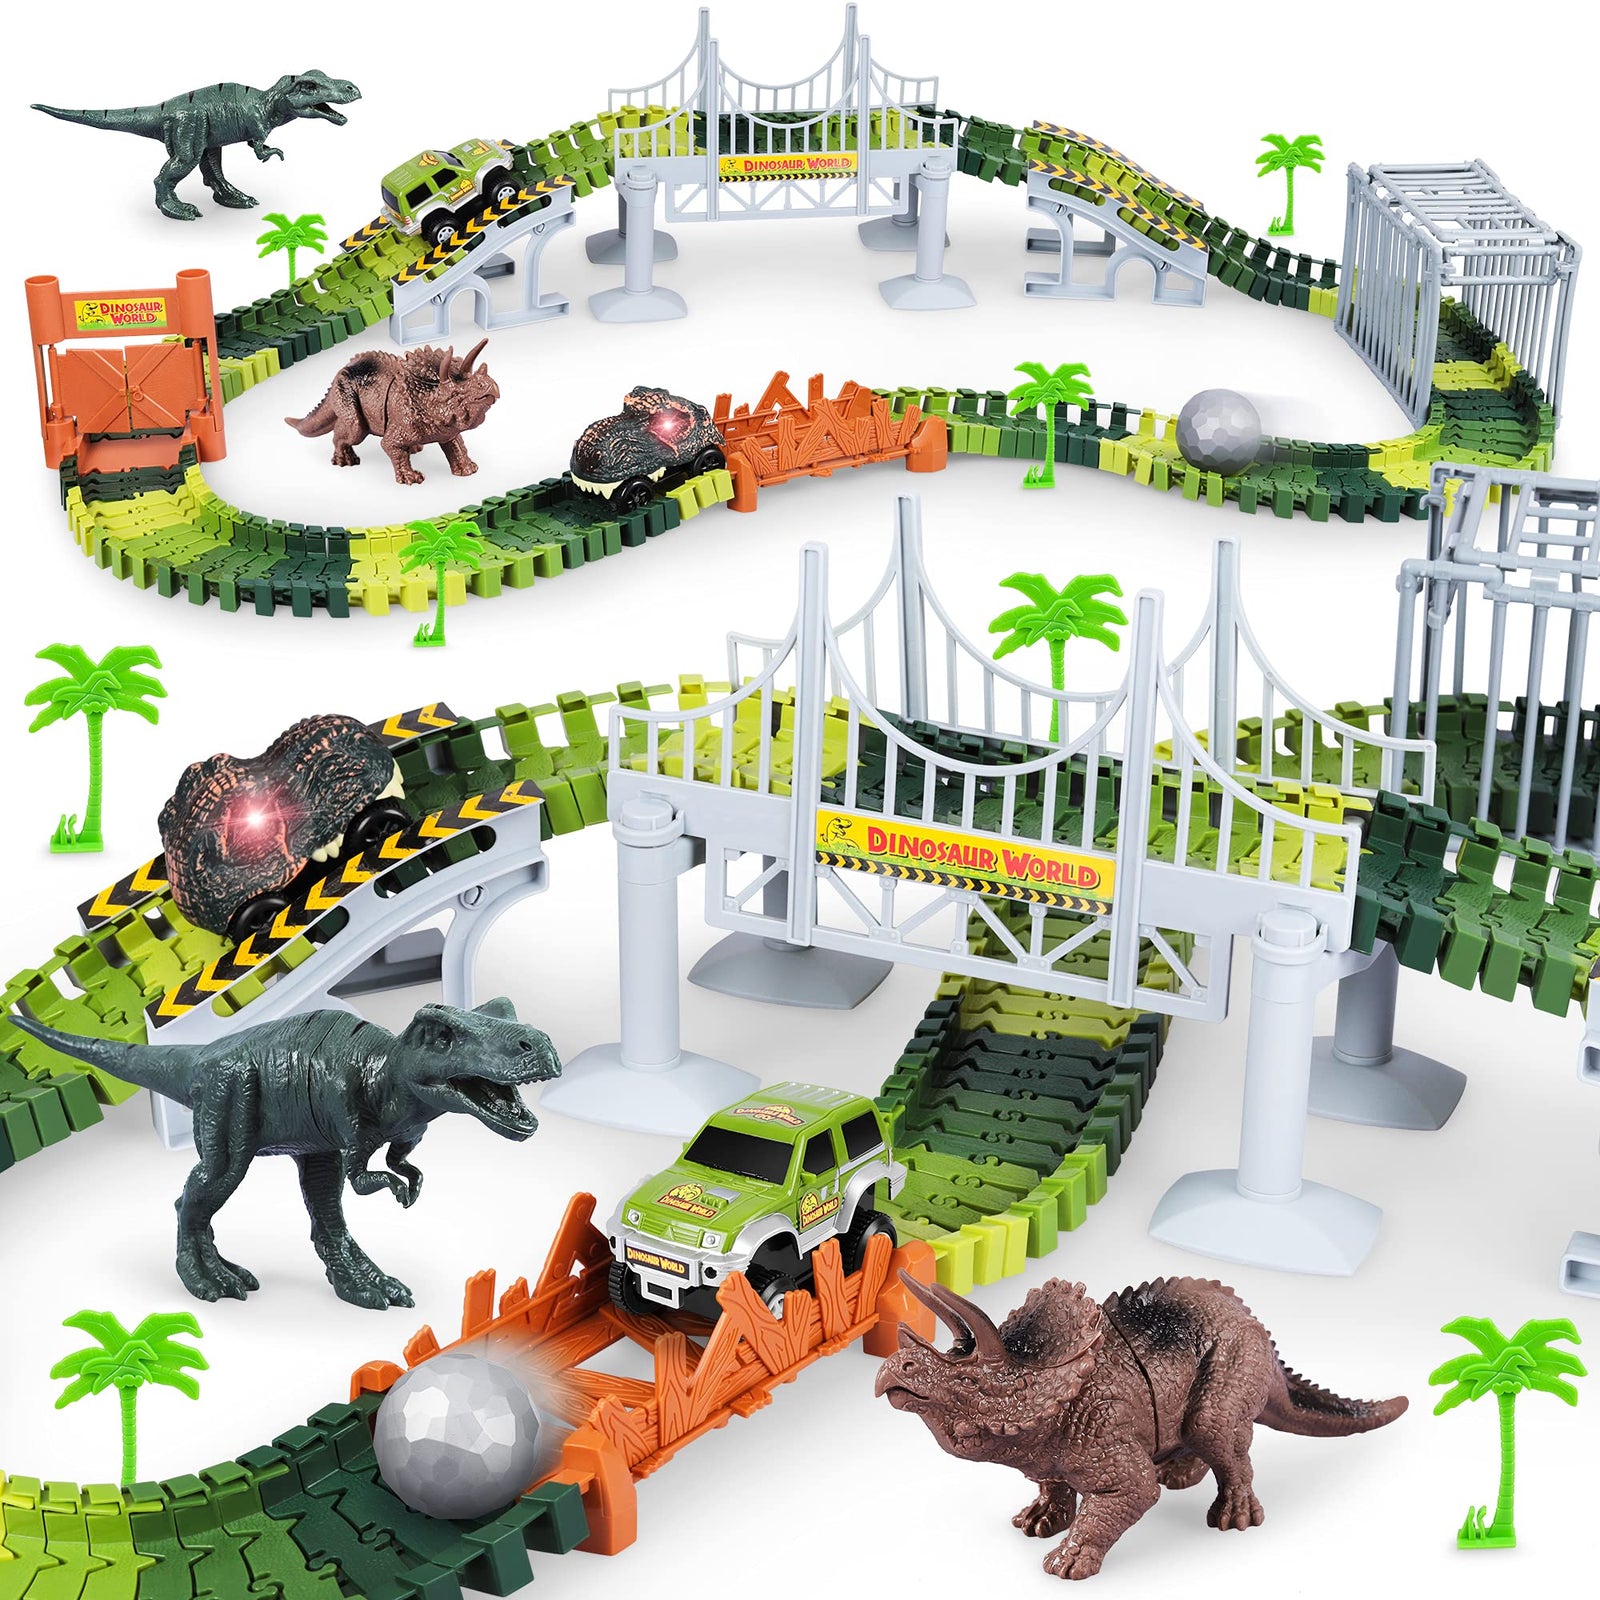 Hony Kids Dinosaur Race Car Track with Flexible Track,Dino Toys, Dinosaur Tracks, Dinosaur Car and Race Car Toys for Kids , Dinosaur Toys for Age 3 4 5 6 7 Year & Up Old boy Girls Birthday Gifts